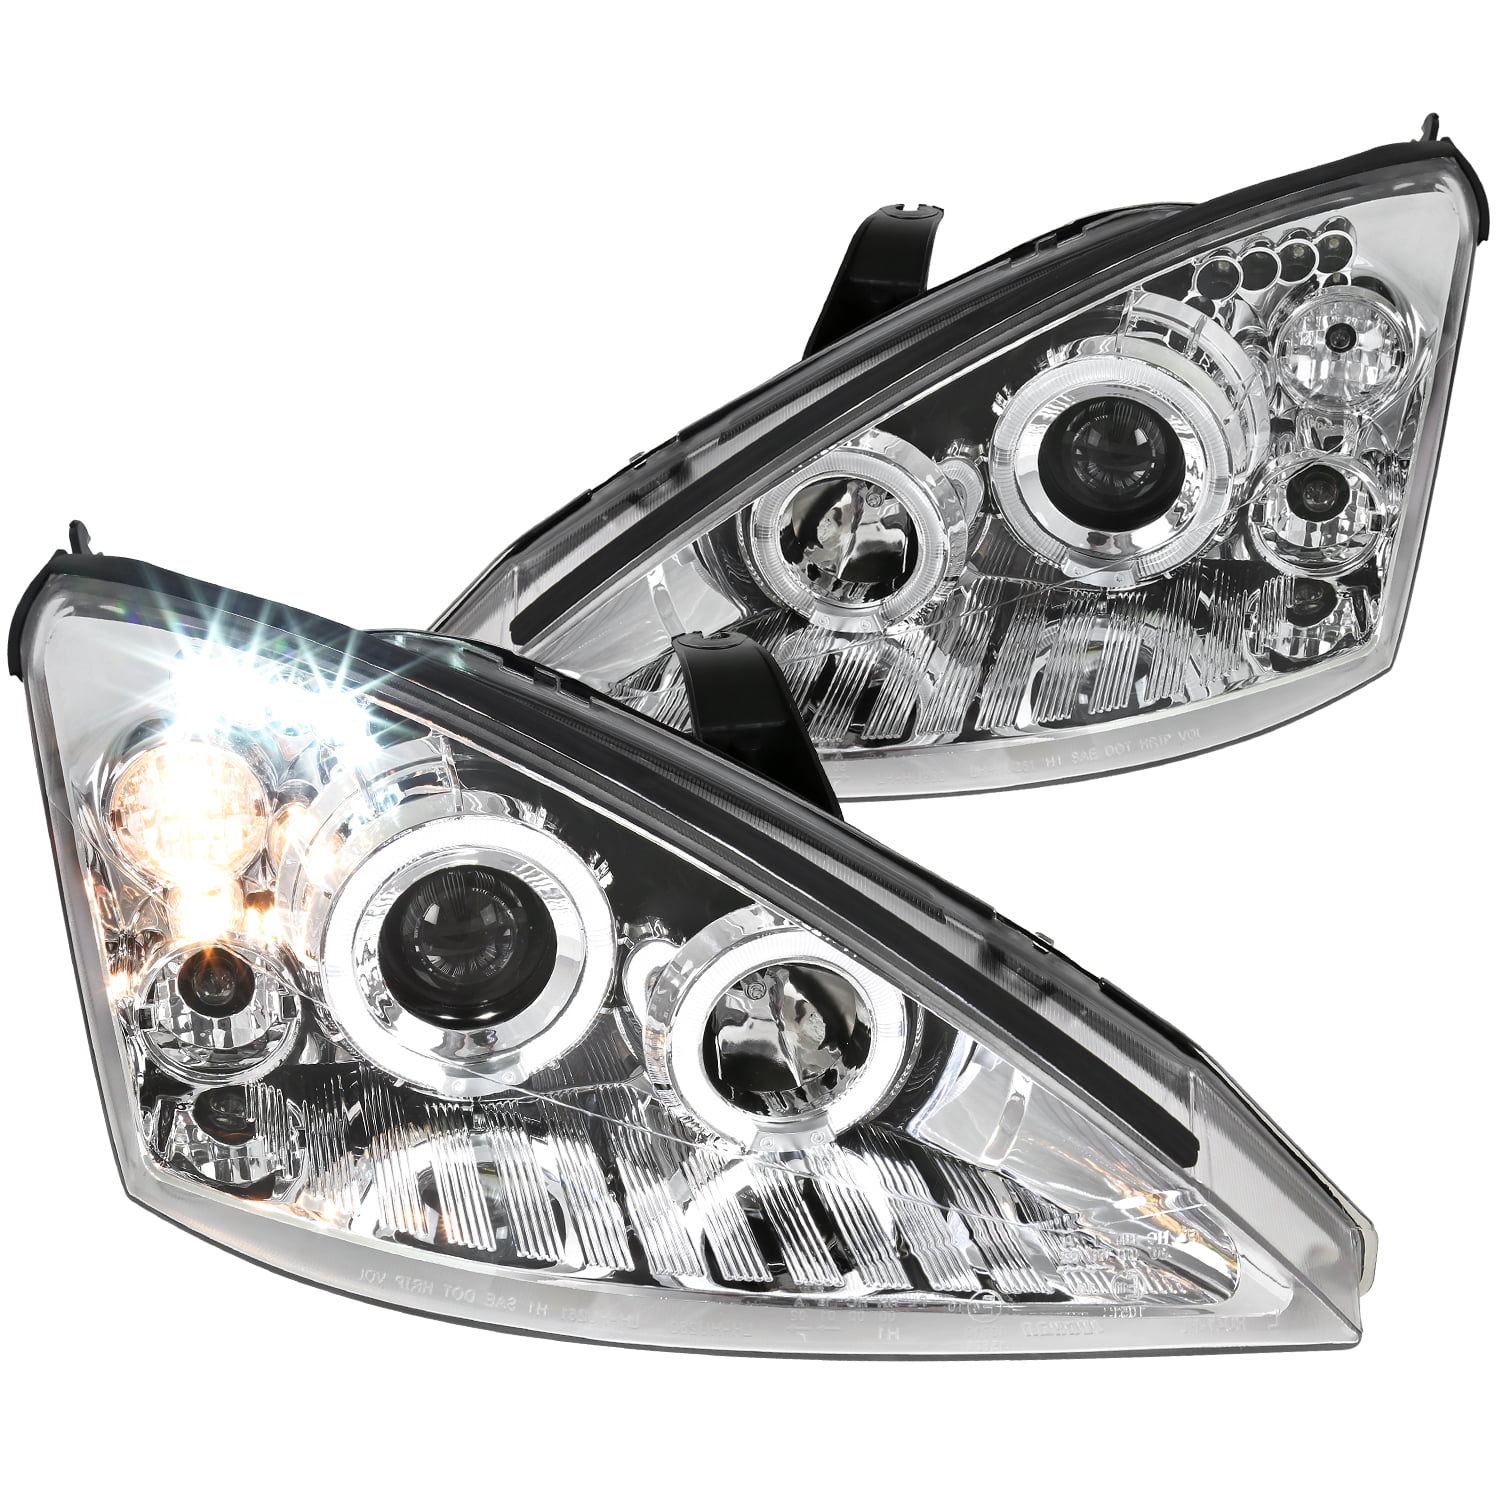 SpecD Tuning Halo Led Projector Headlights for 20002004